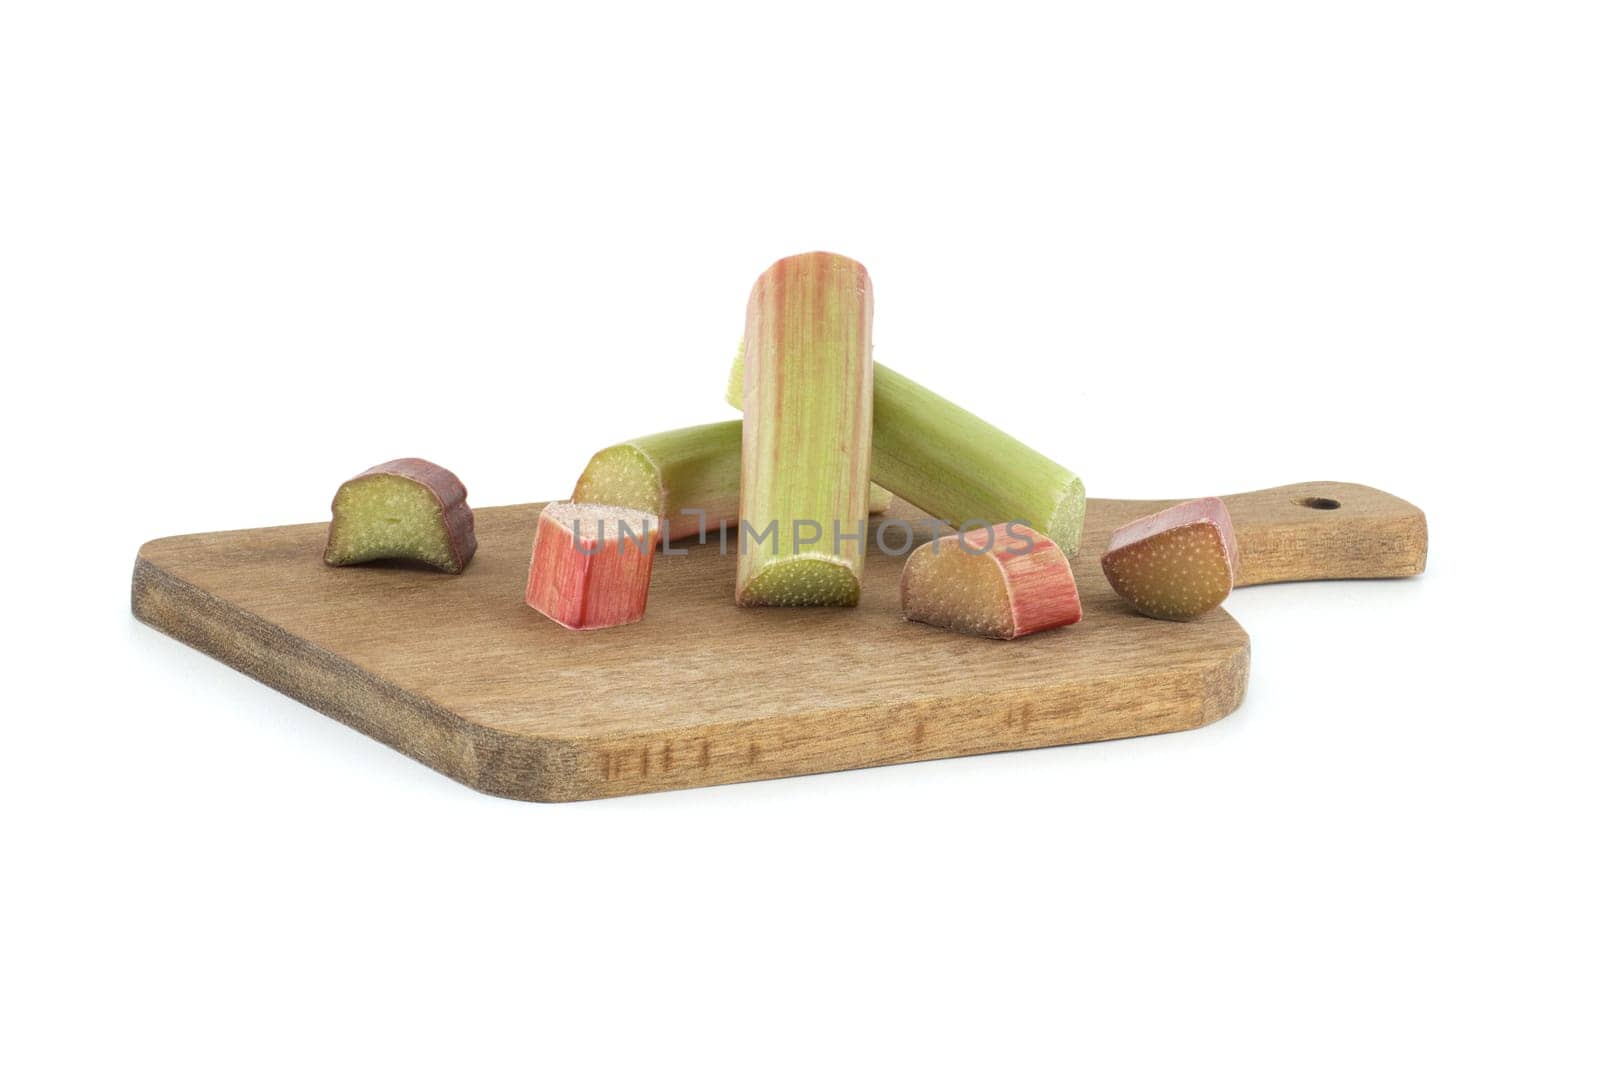 Rhubarb stalks of varying colors over white background by NetPix